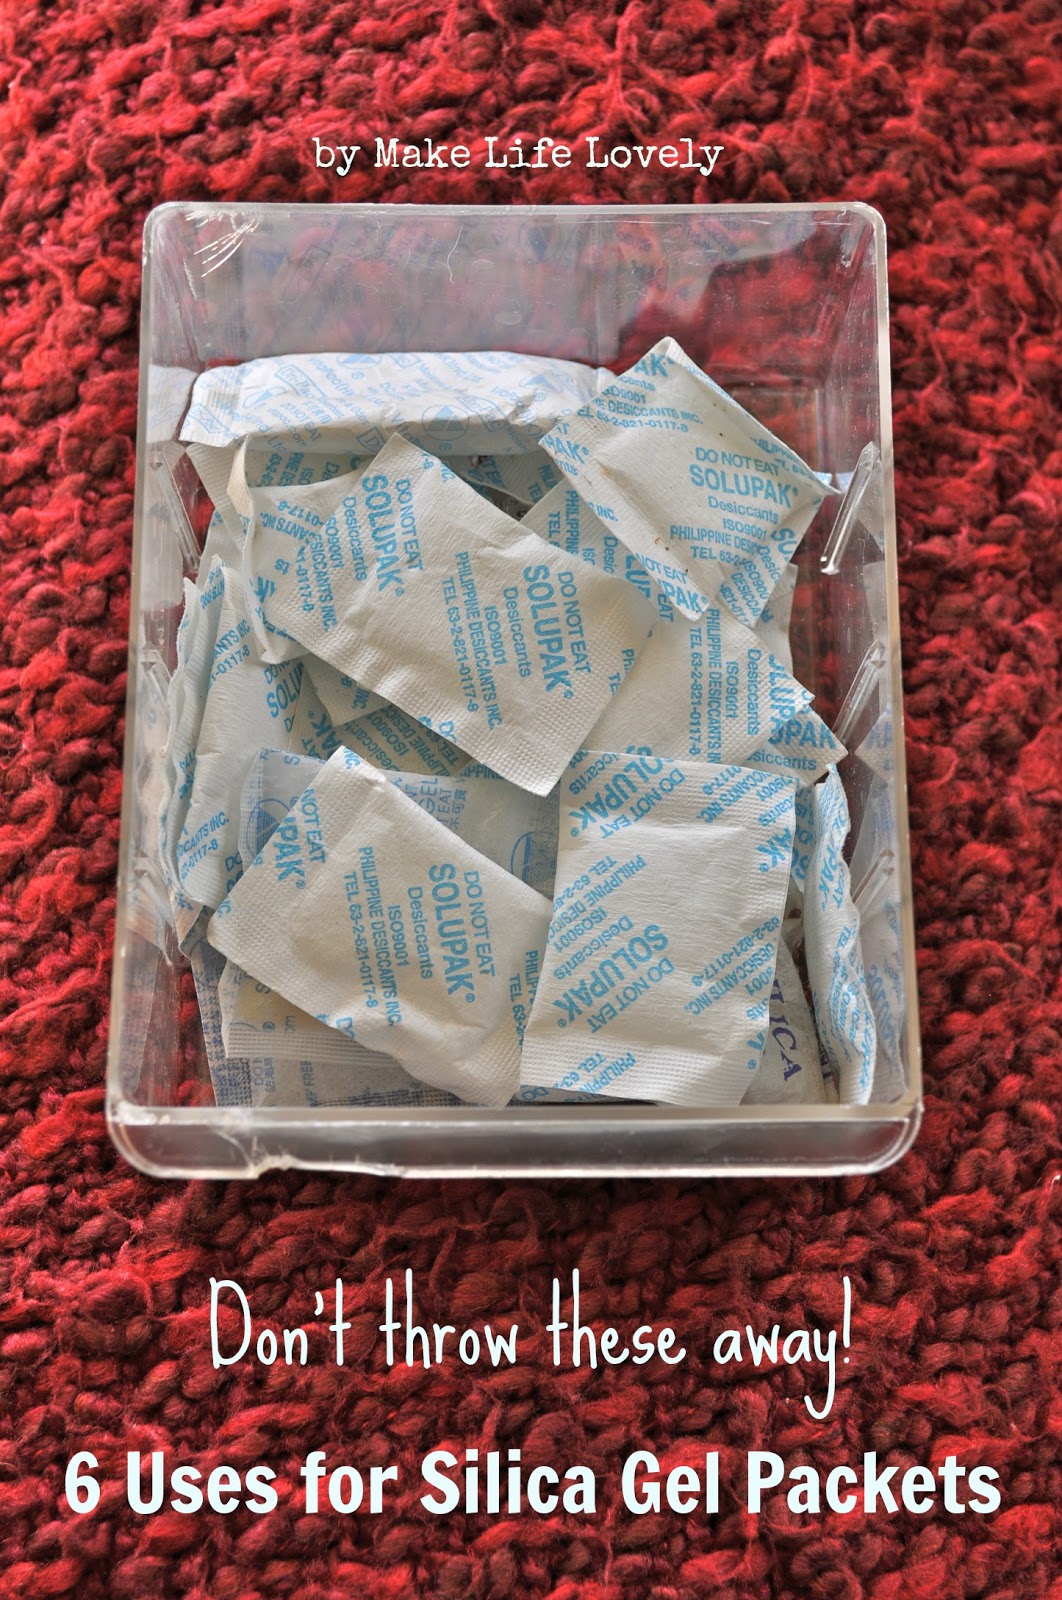 Can you reuse silica gel bags?